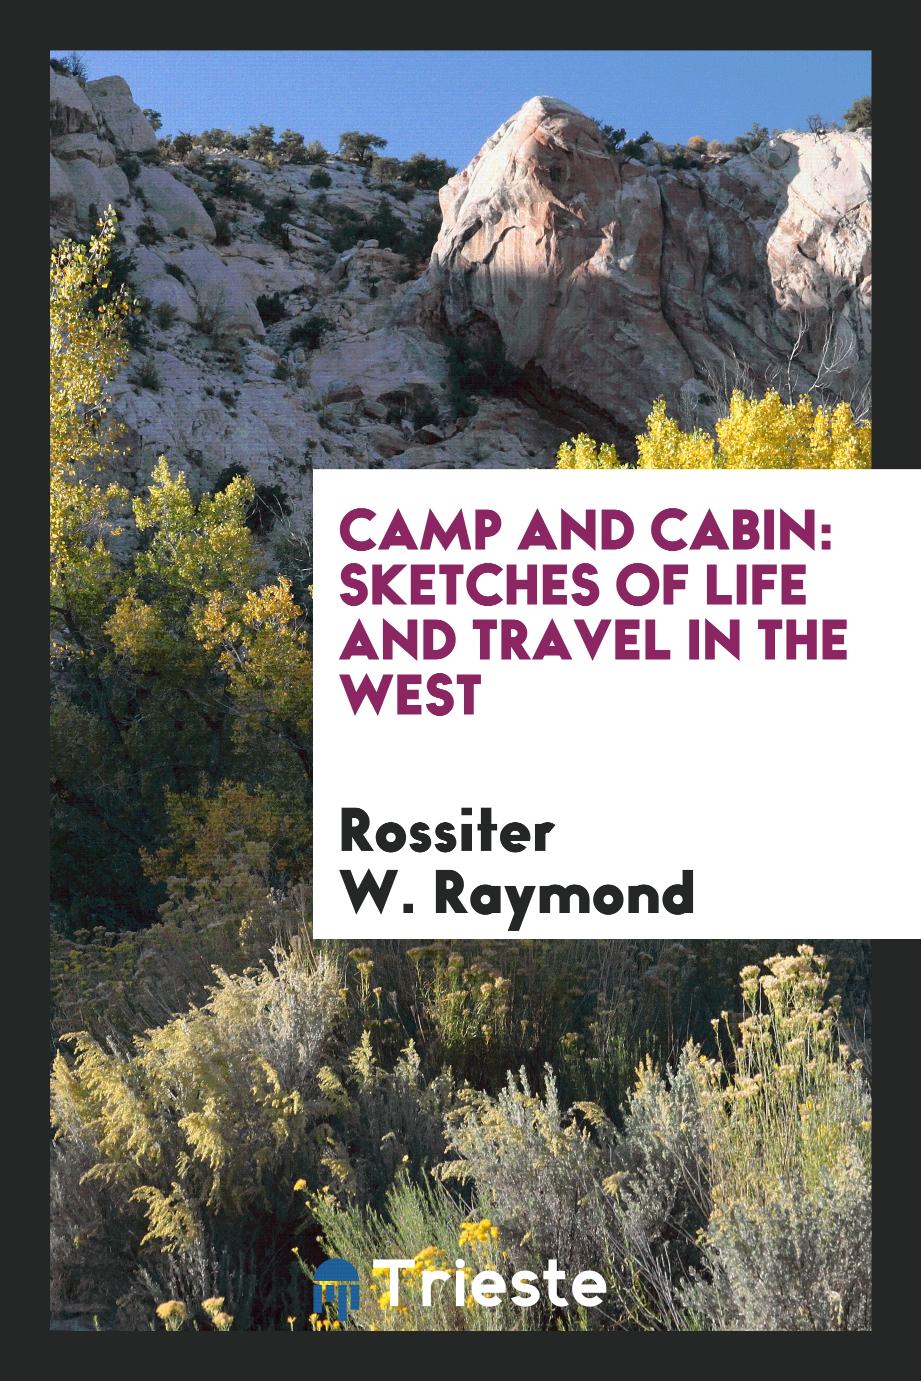 Camp and cabin: sketches of life and travel in the West